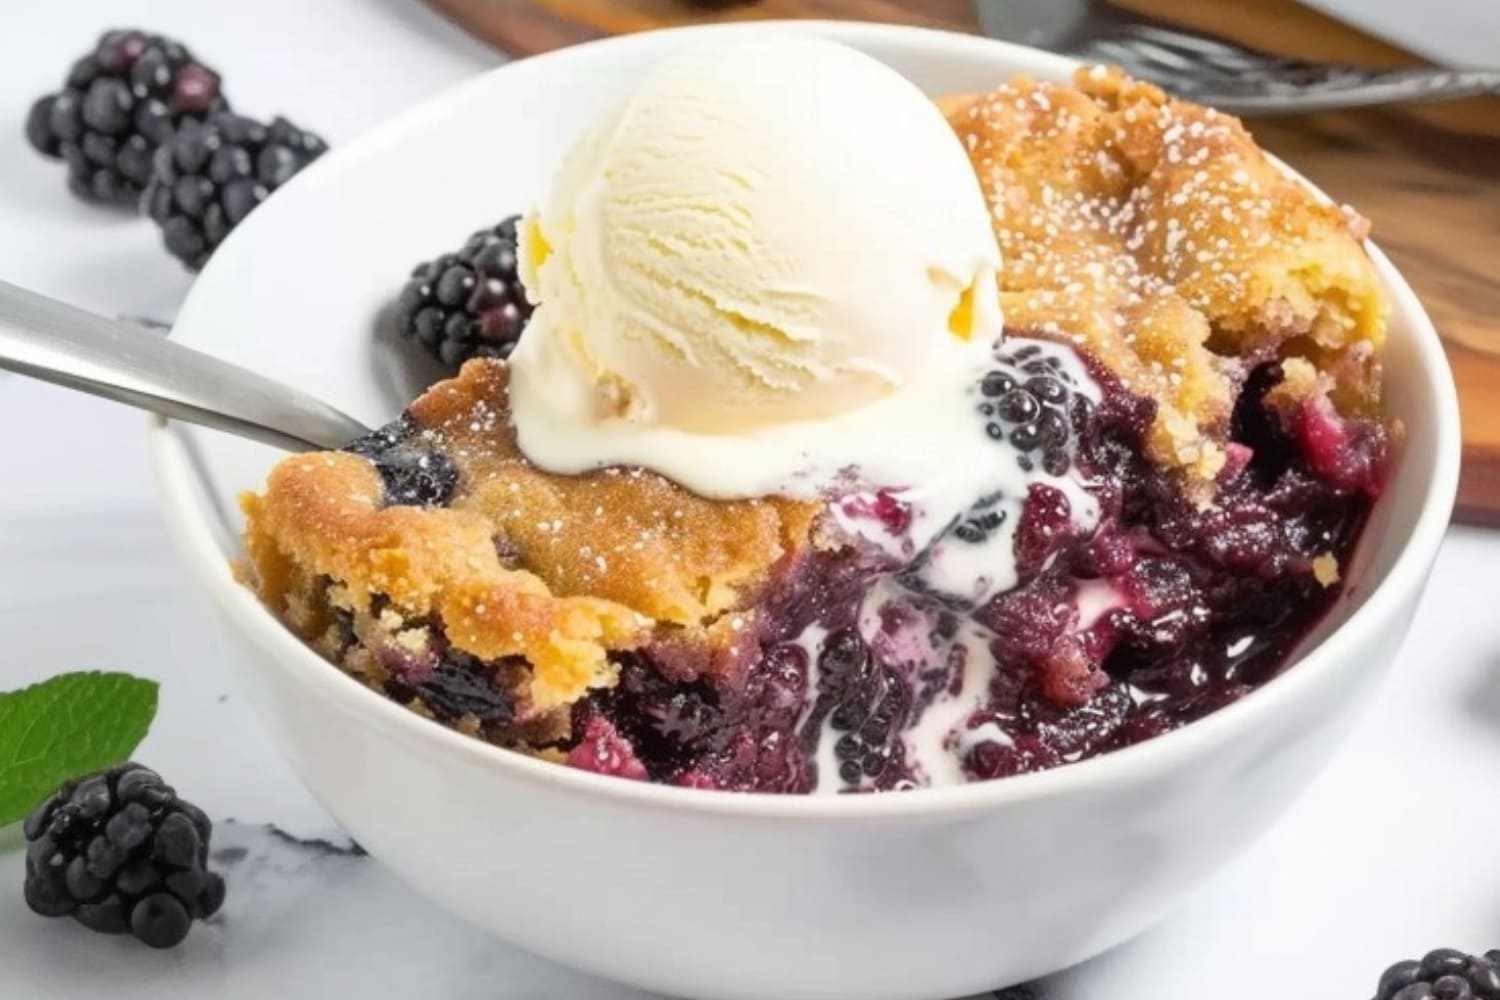 Blackberry dump cake served in a white bowl garnished with vanilla ice cream.